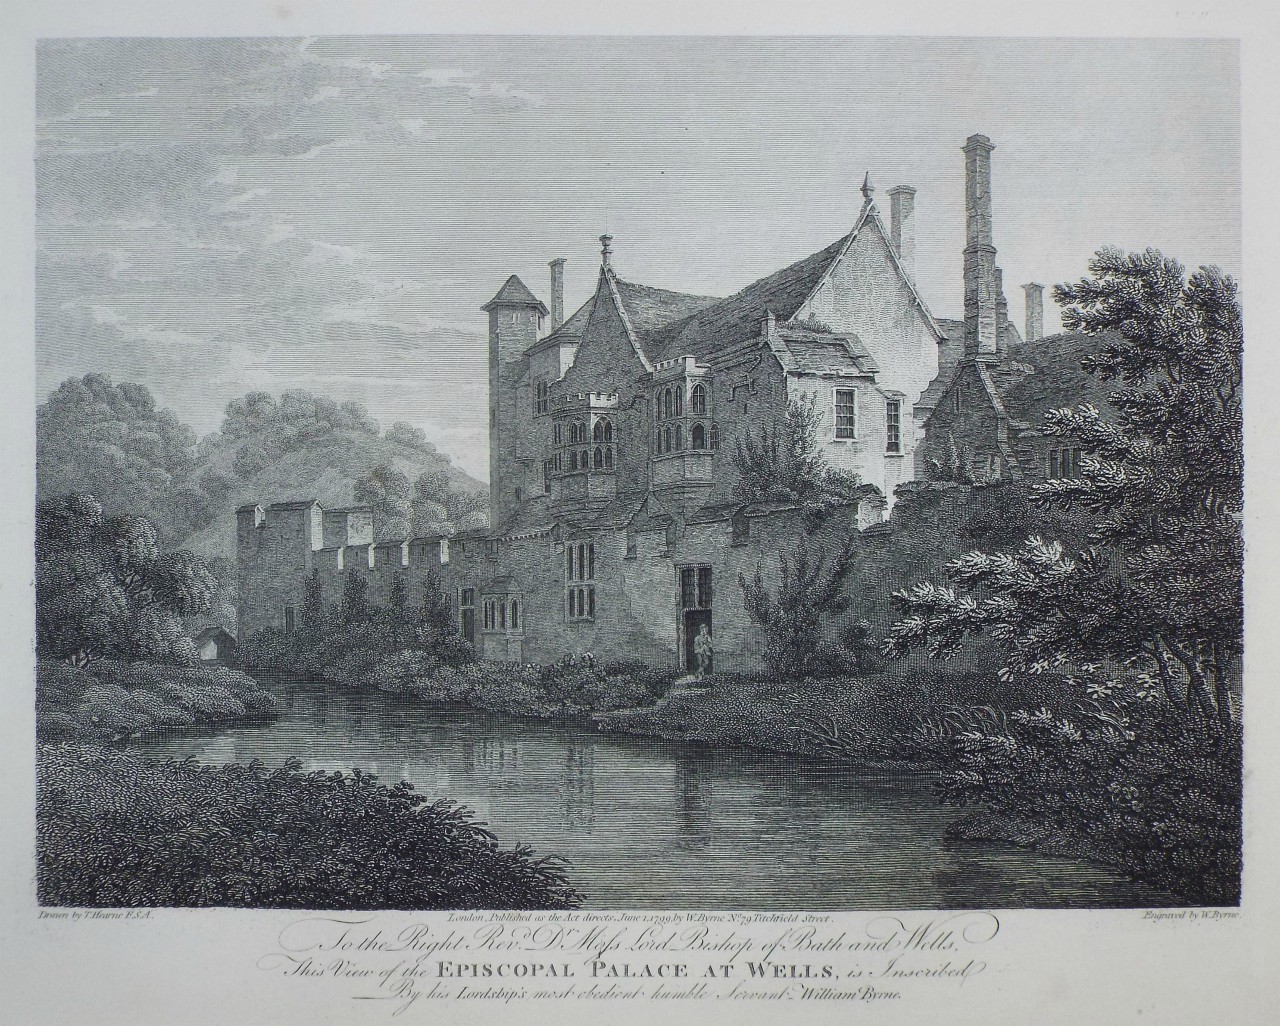 Print - Episcopal Palace at Wells - Byrne